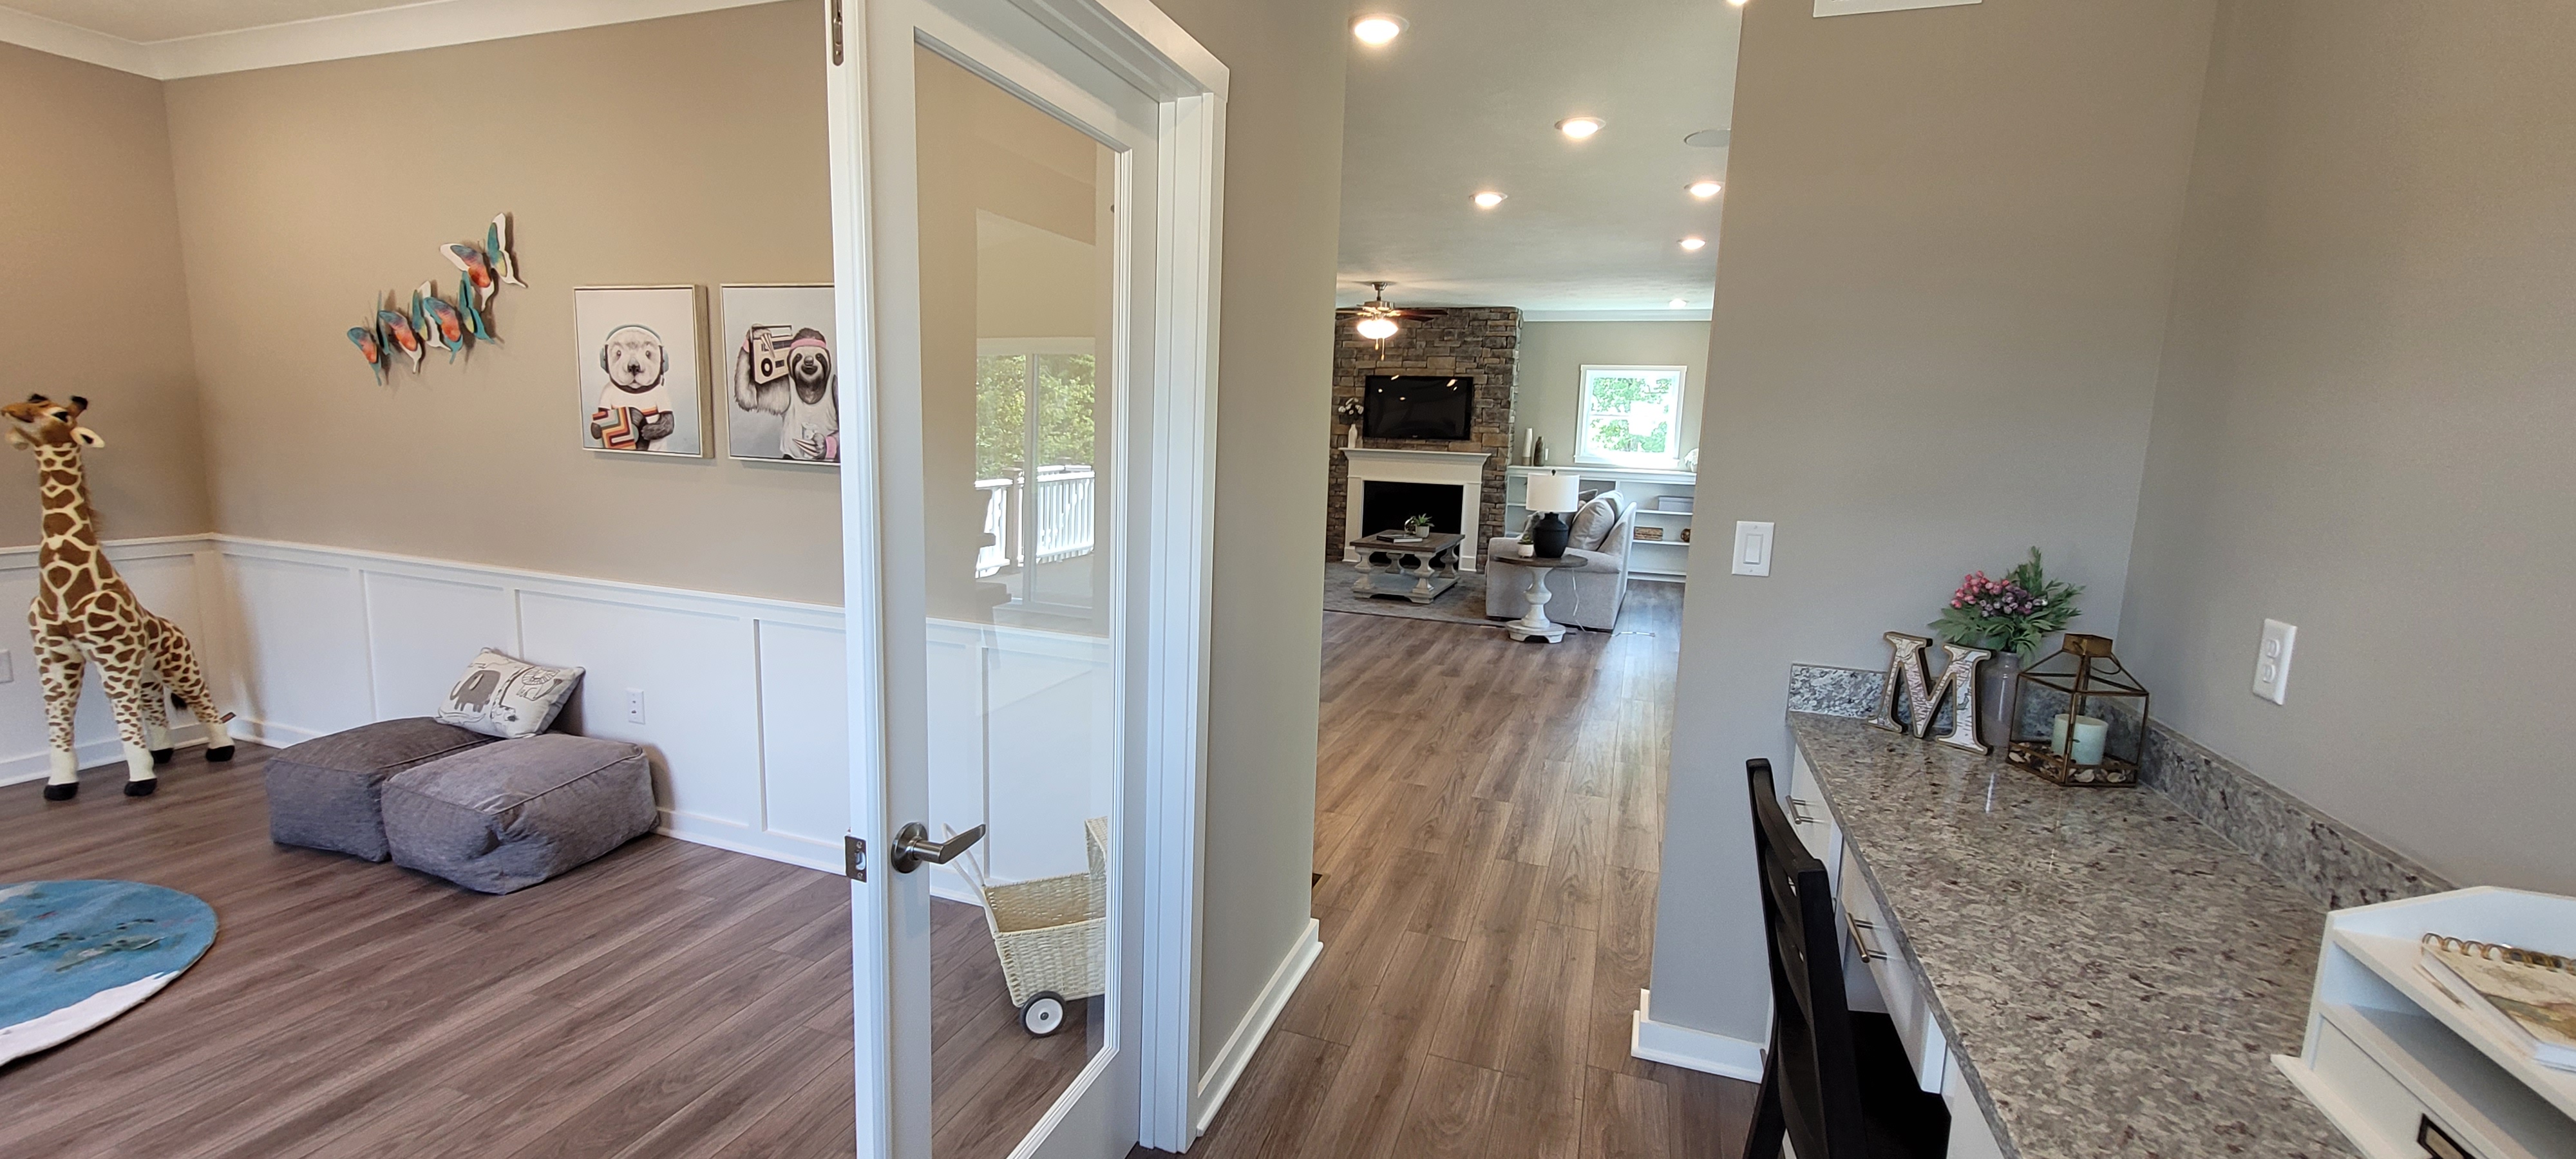 Playroom flex space leads into livingroom in a new home in Allegheny County